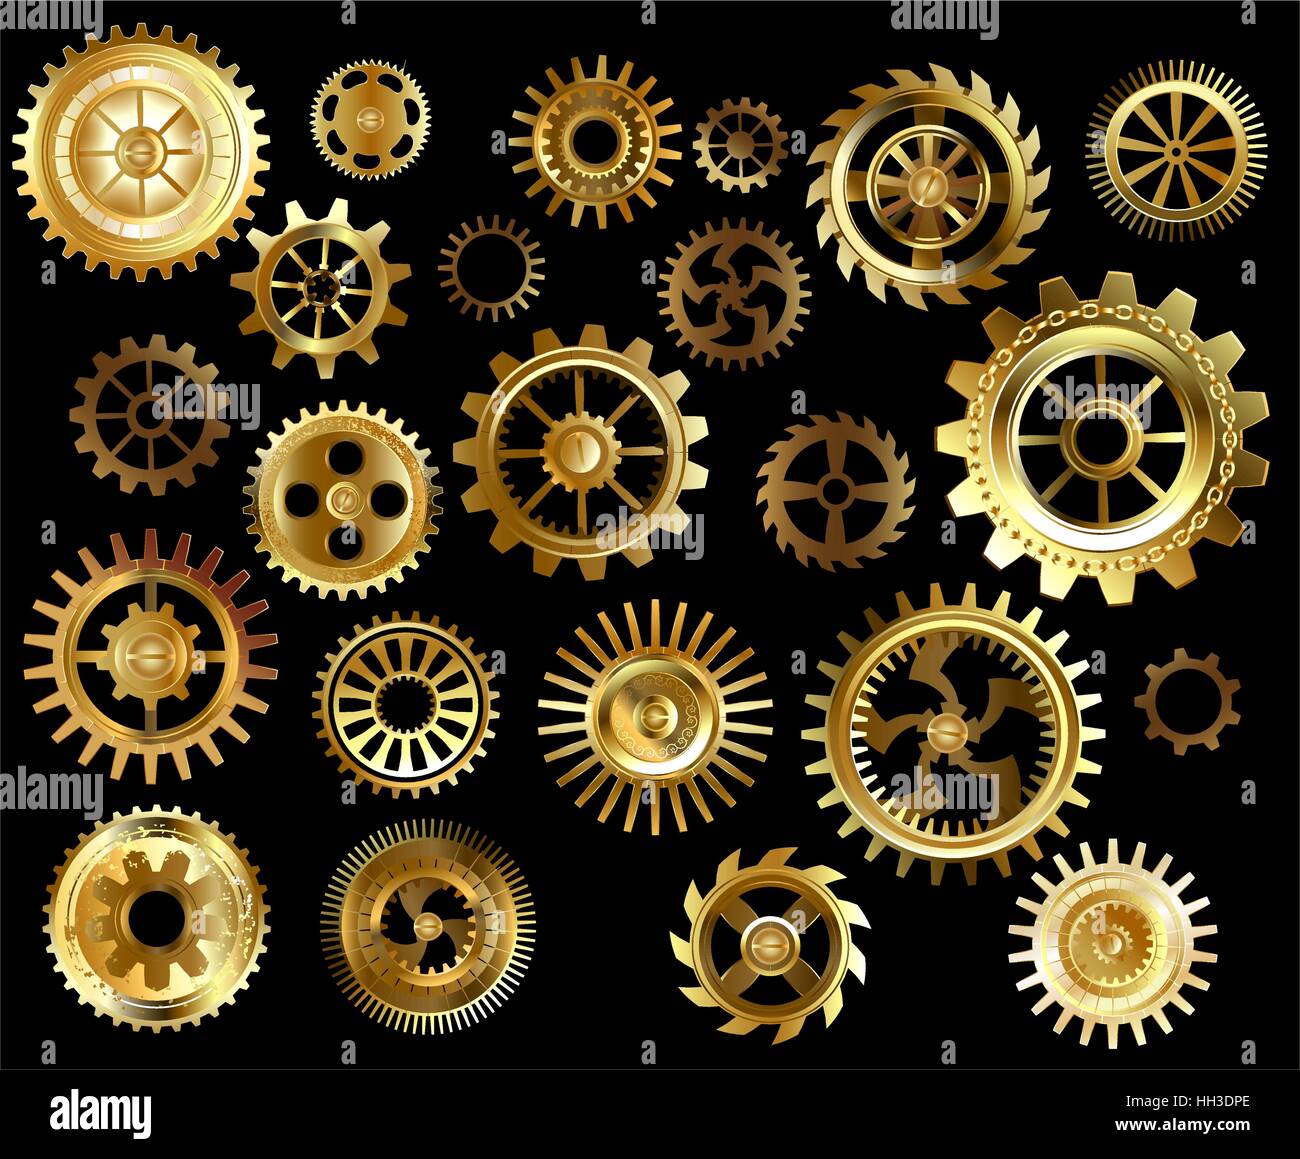 Set of gold and brass gears on a black background. Stock Vector